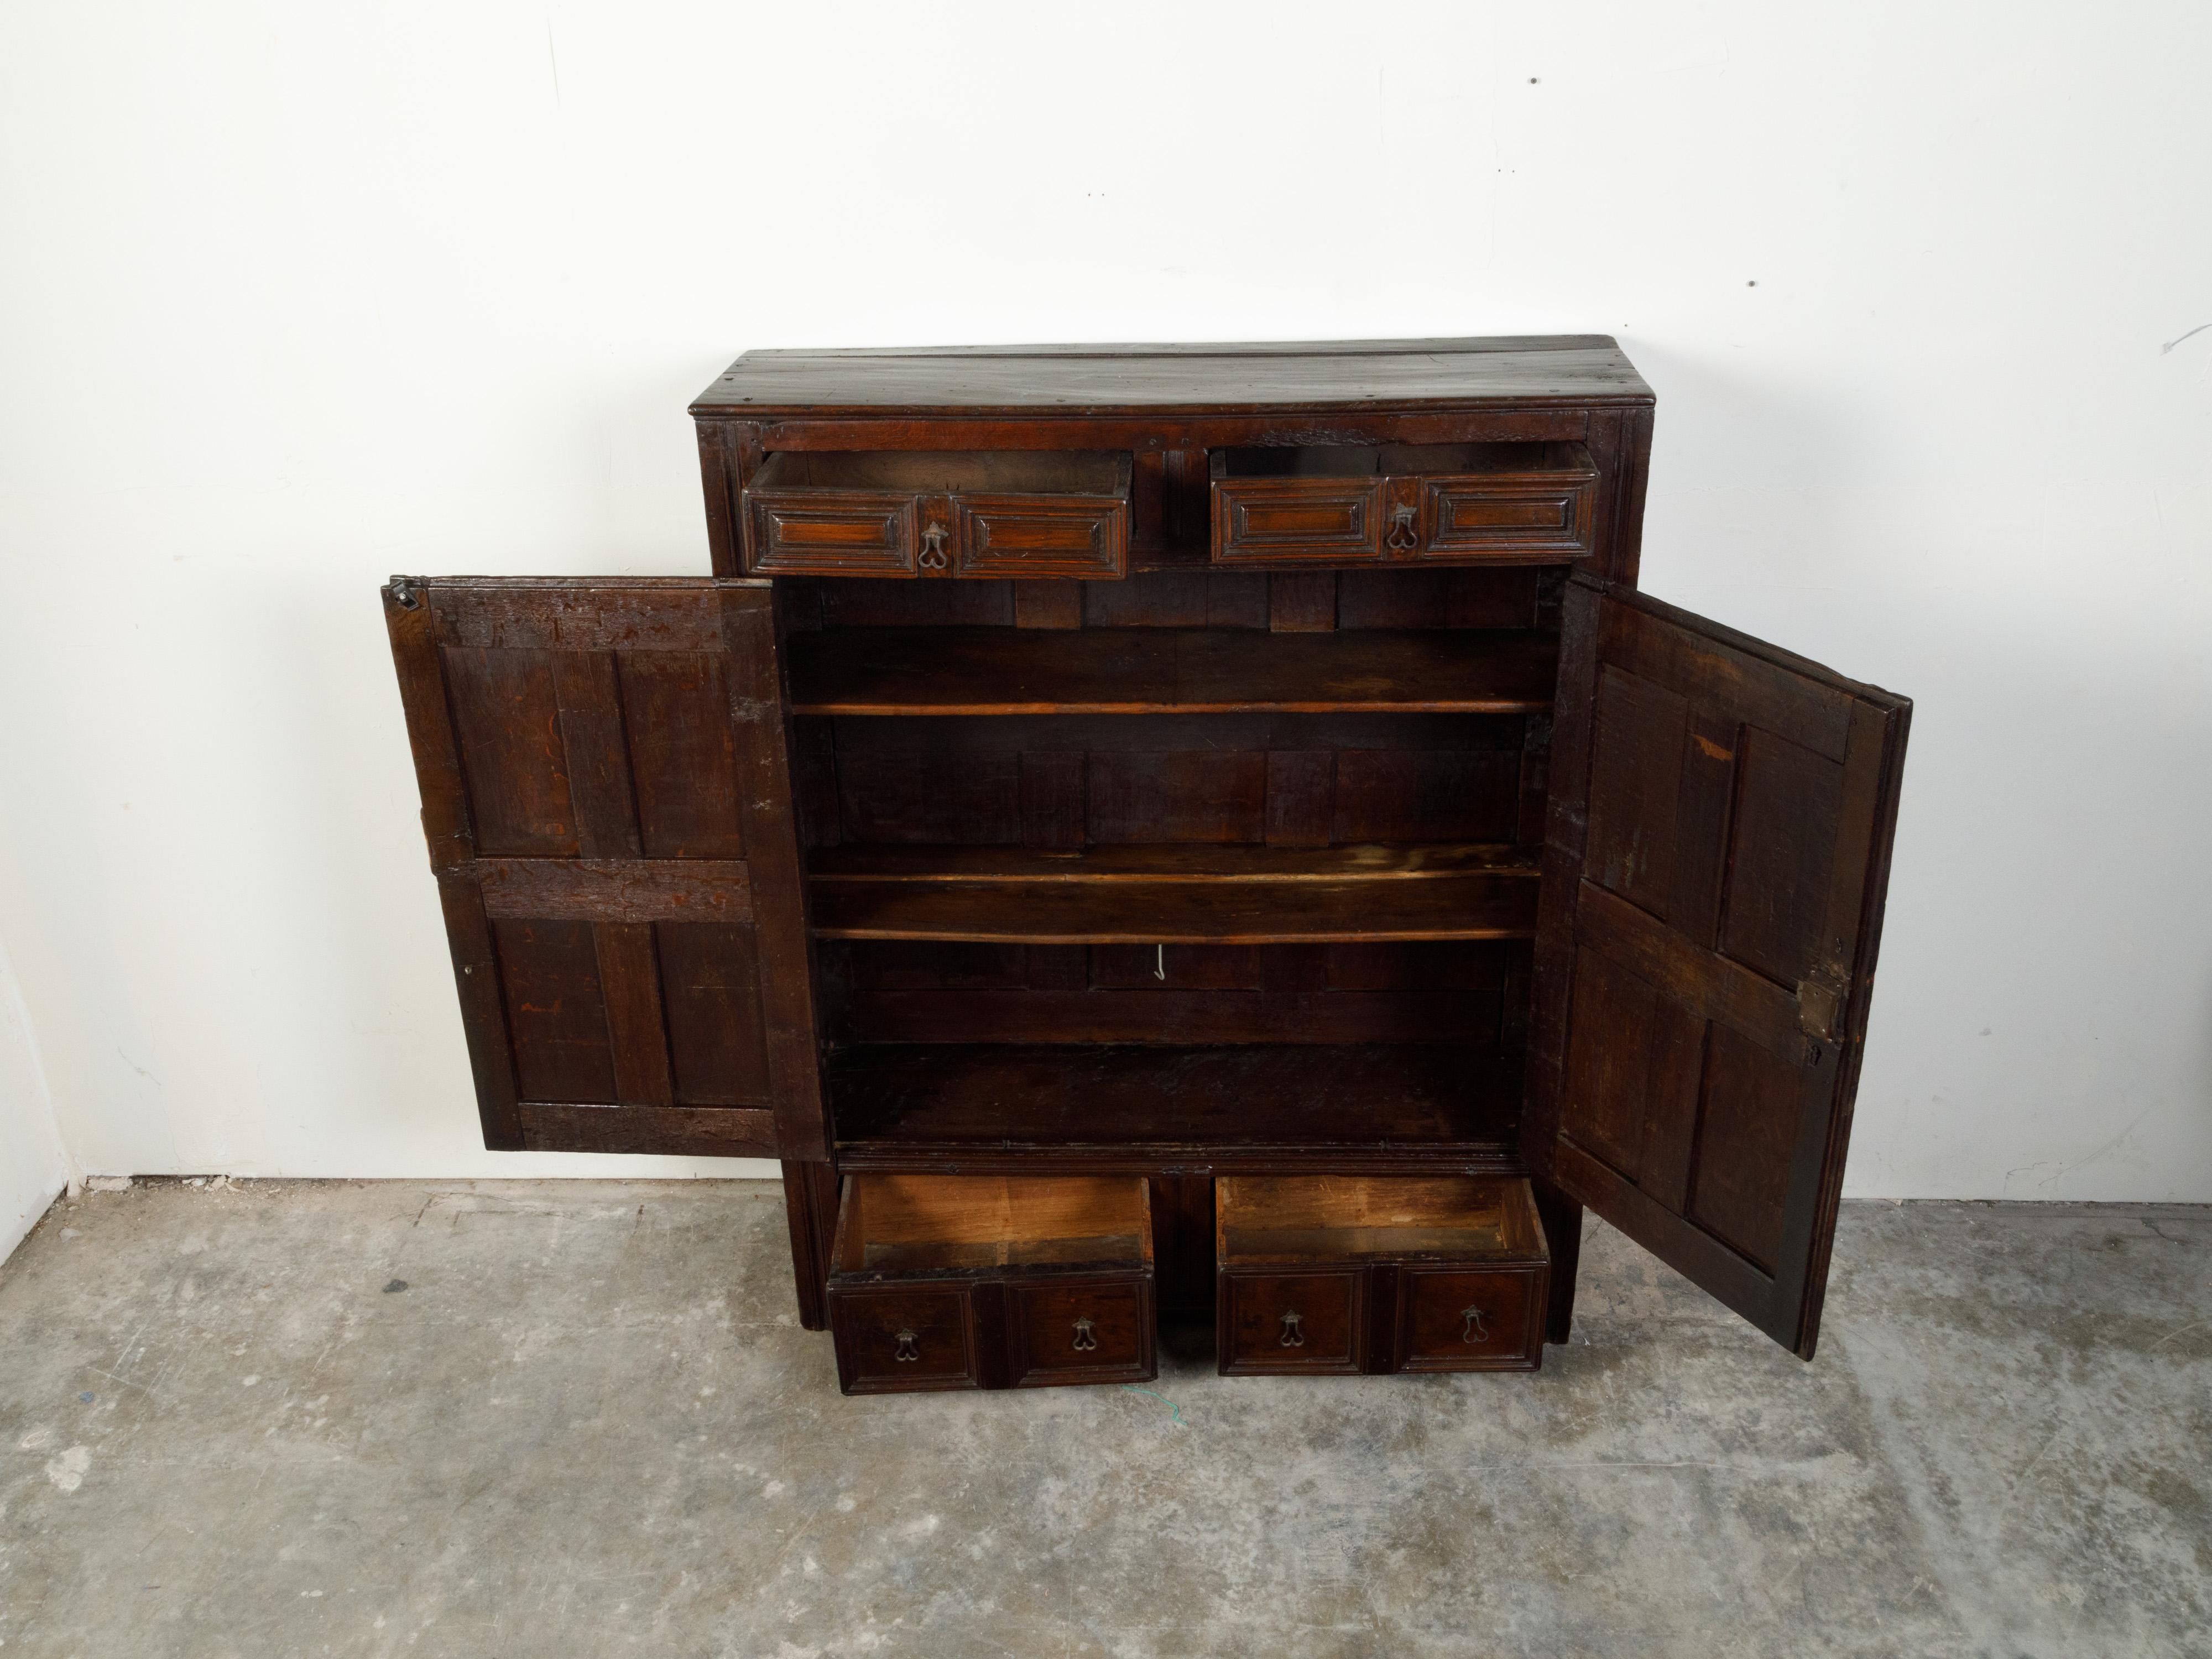 Carved English 1800s Wooden Court Cupboard with Doors, Drawers and Diamond Motifs For Sale